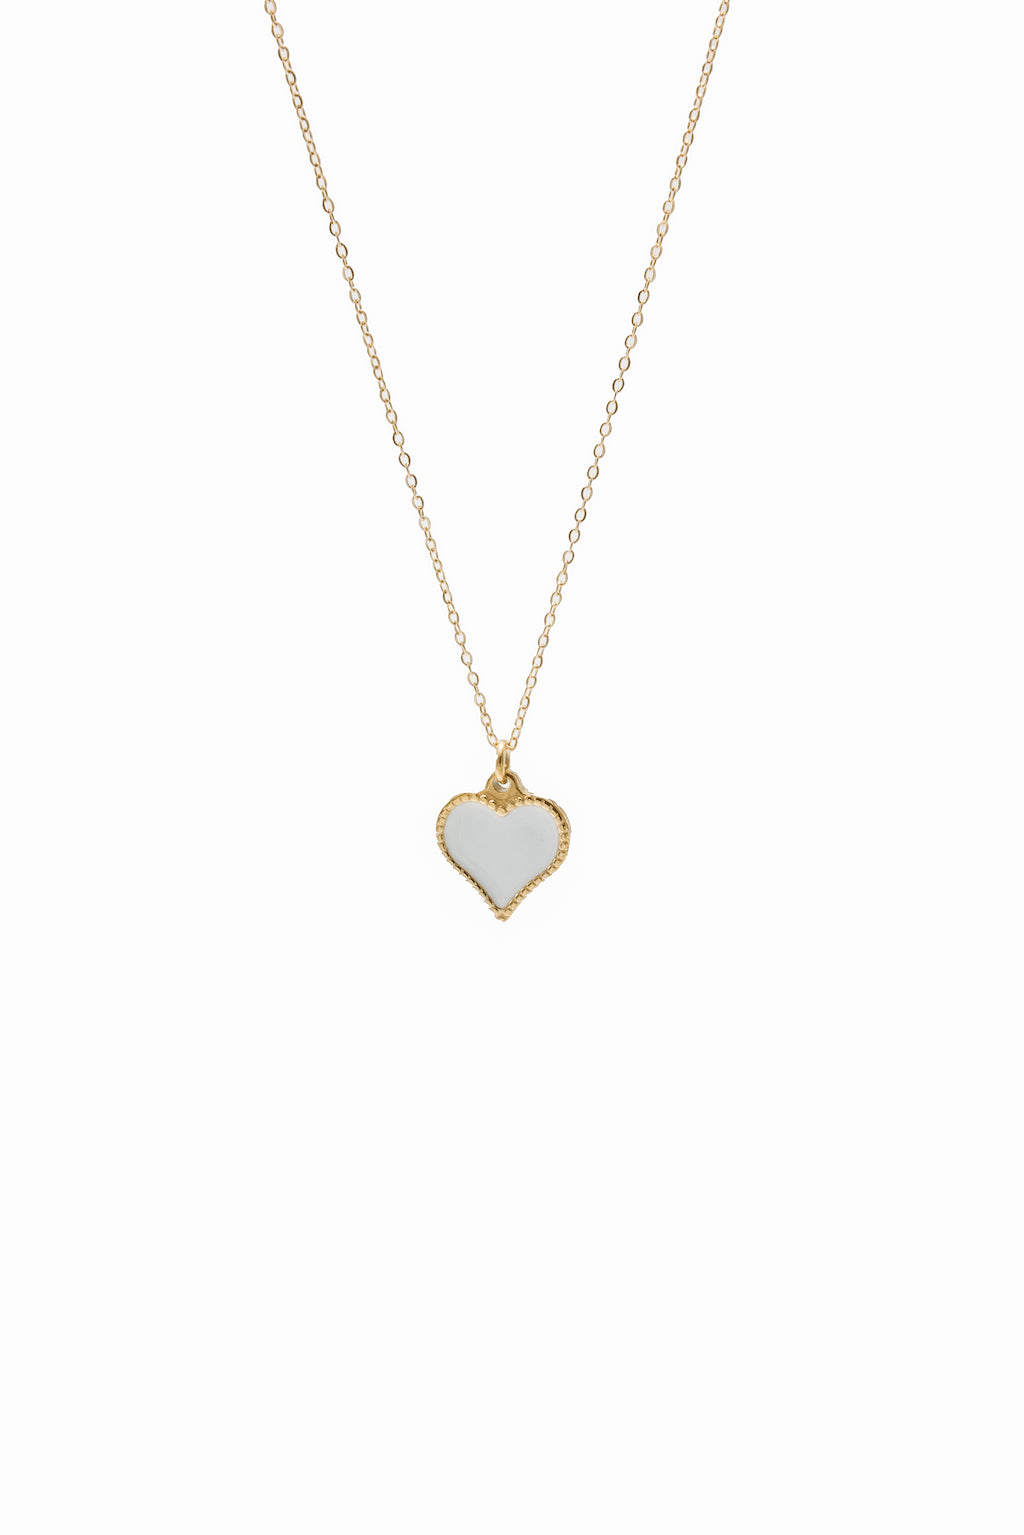 Van Cleef & Arpels Alhambra Mother Of Pearl Necklace in 18k Yellow Gold |  myGemma | Item #129066